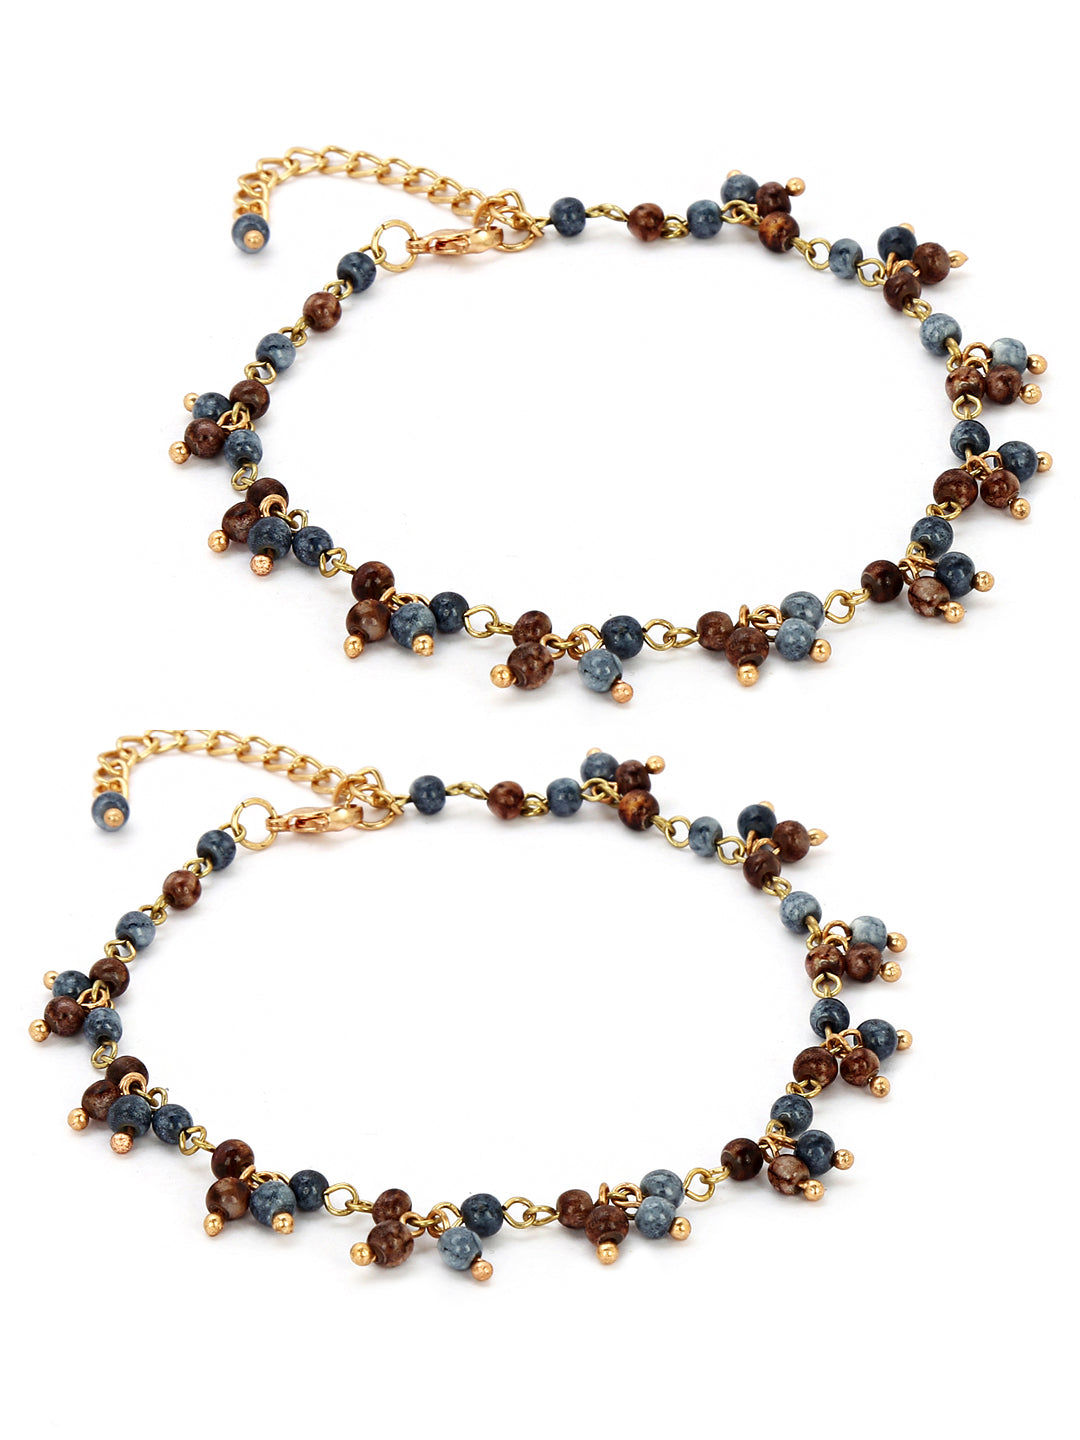 Set of 4 antique gold toned beaded anklets